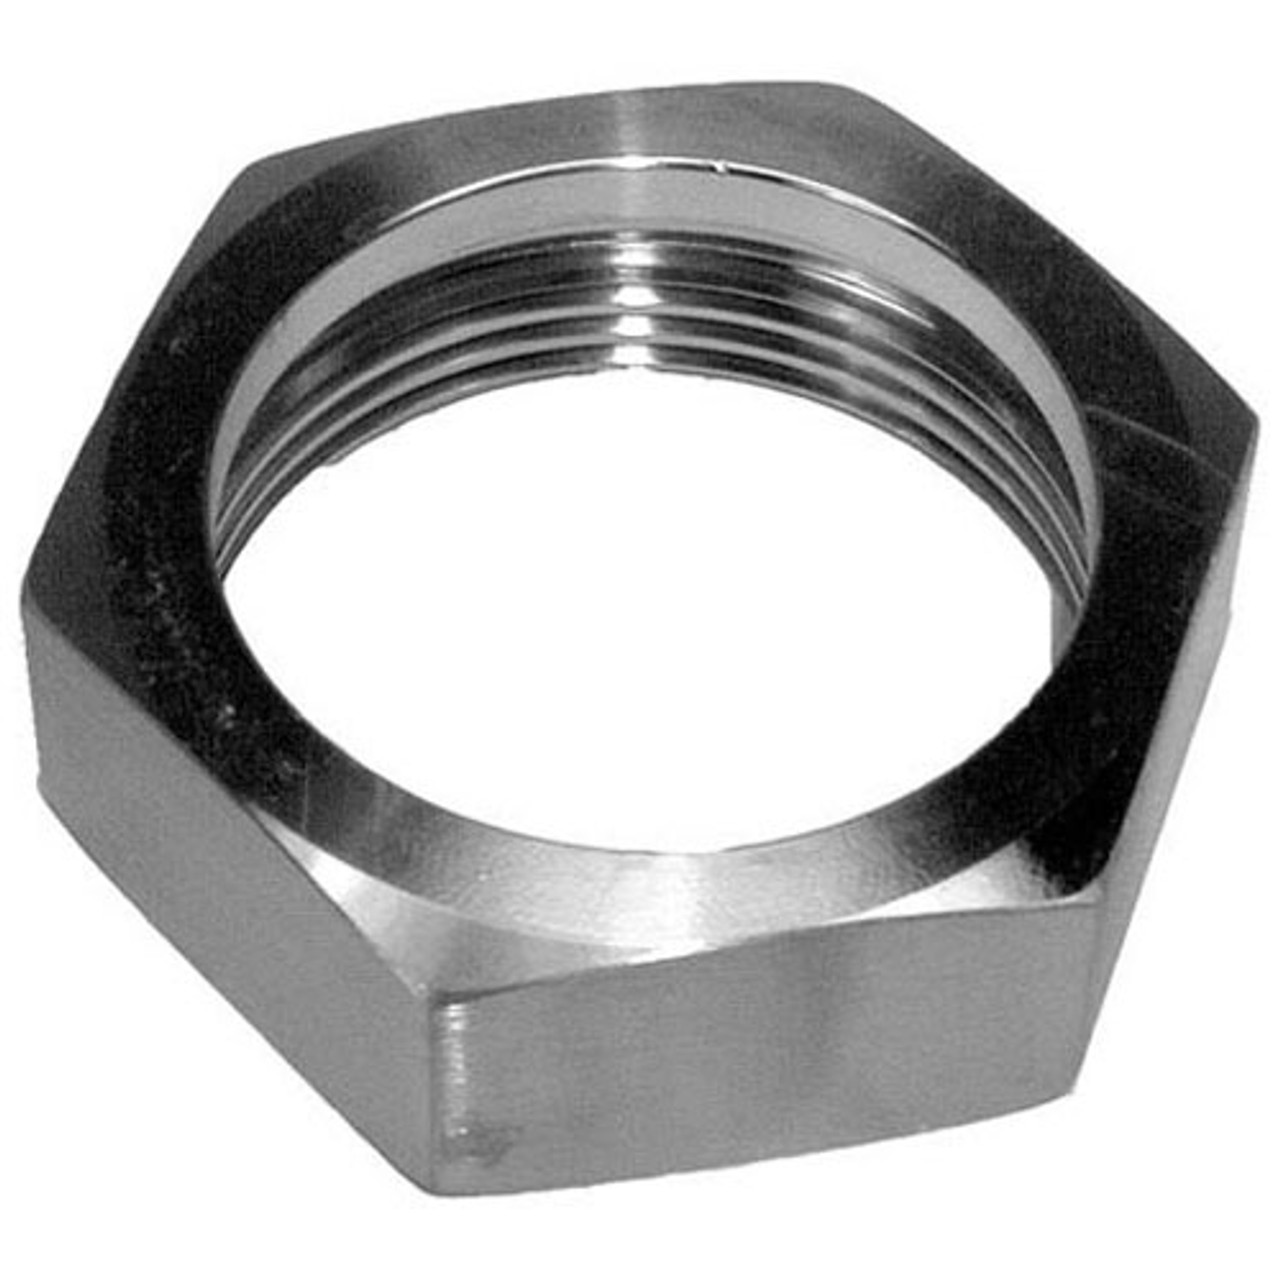 Hex Nut - Replacement Part For Legion 450033-01